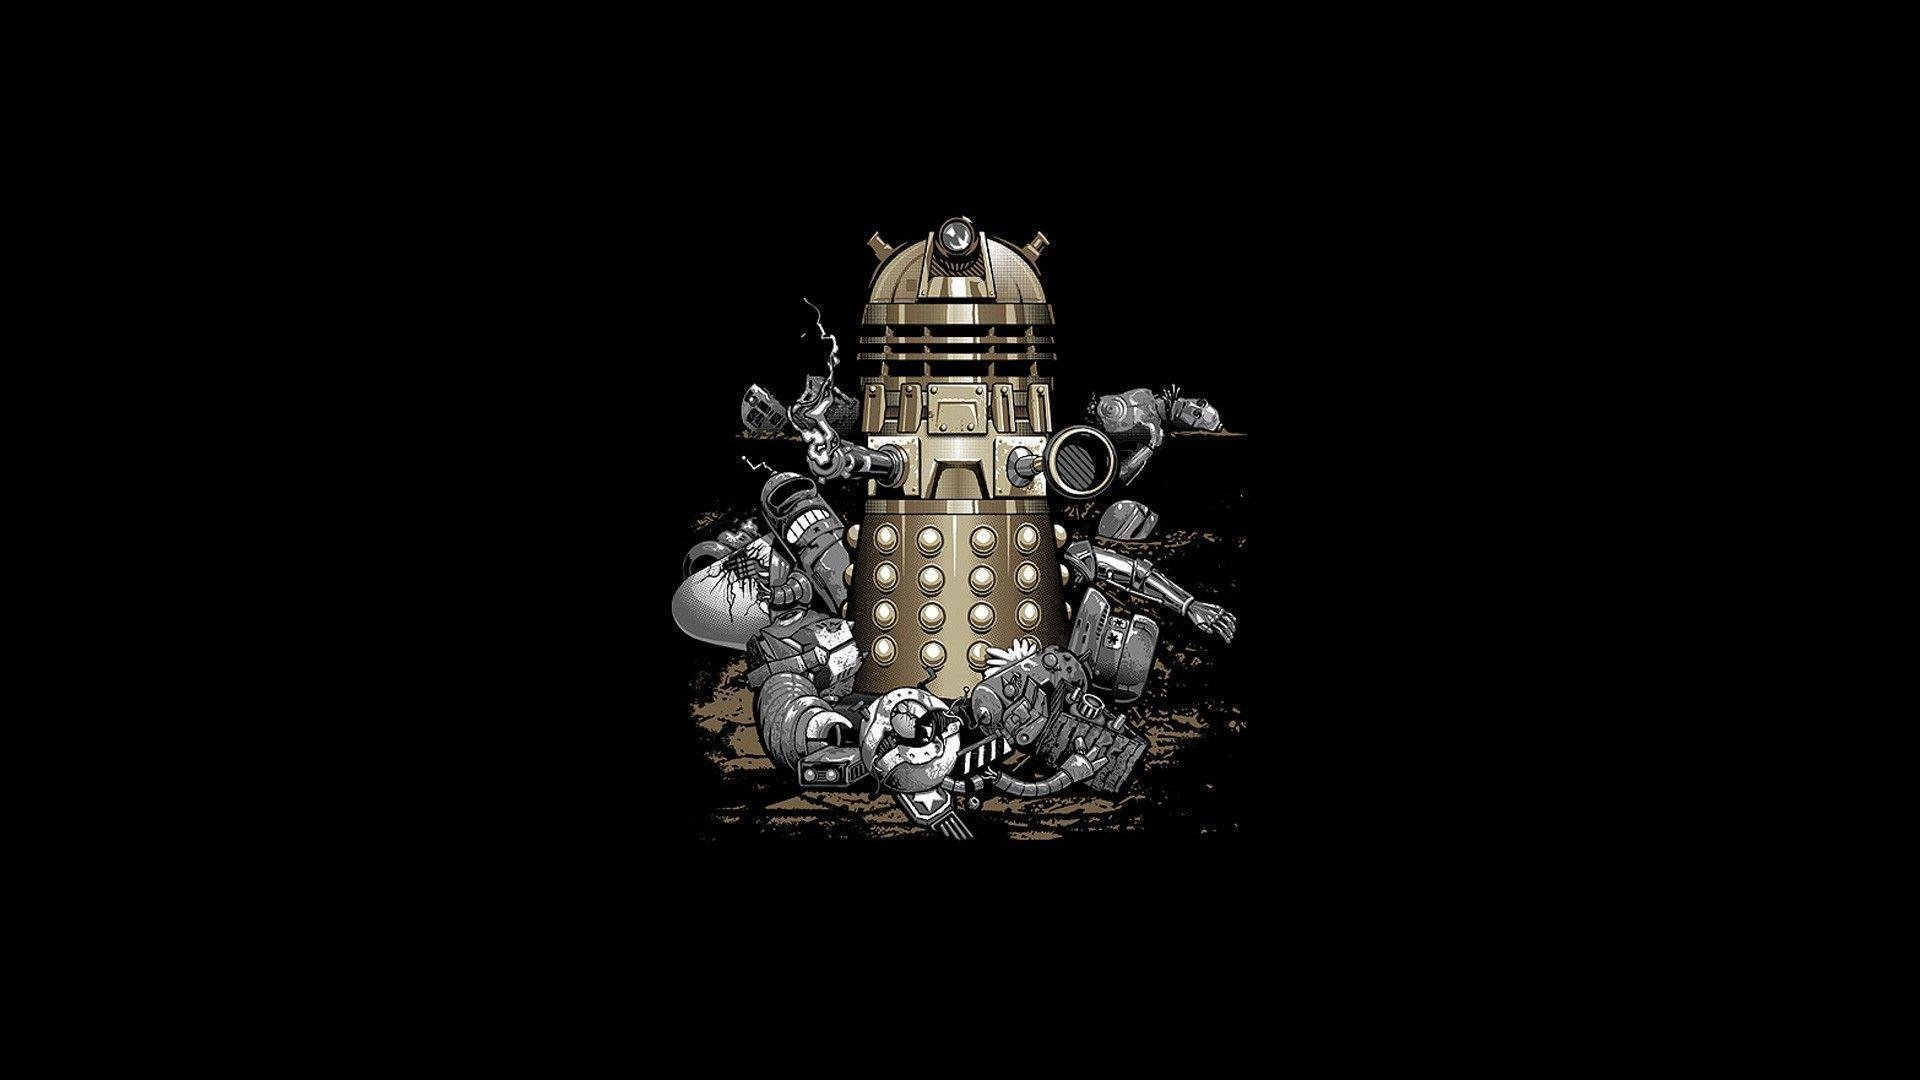 Daleks Doctor Who Wallpaper 1920x1080PX Wallpaper Doctor Who HD